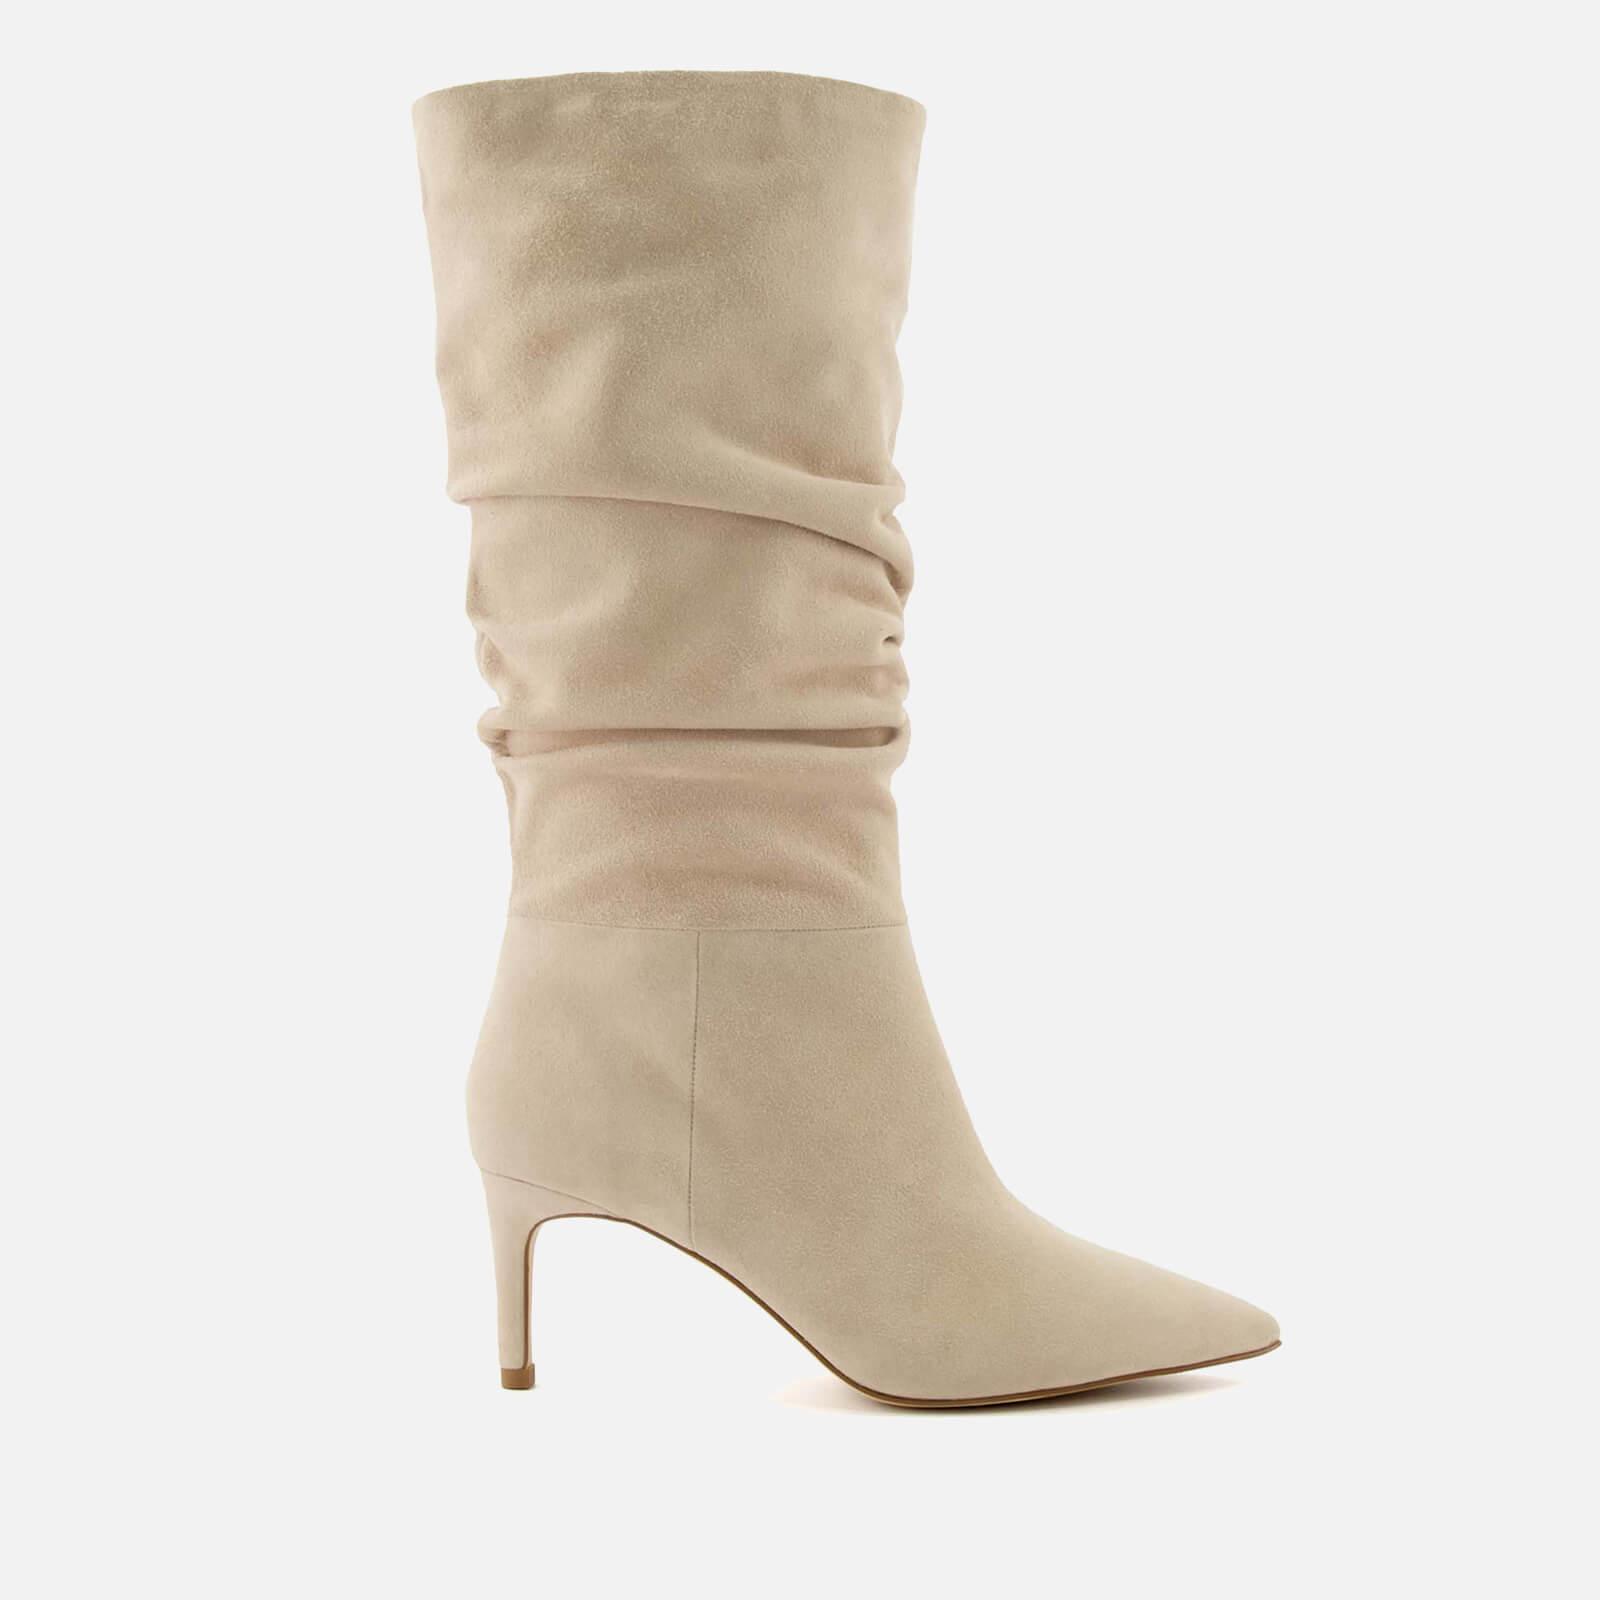 Dune Slouch Suede Heeled Knee High Boots in Natural | Lyst